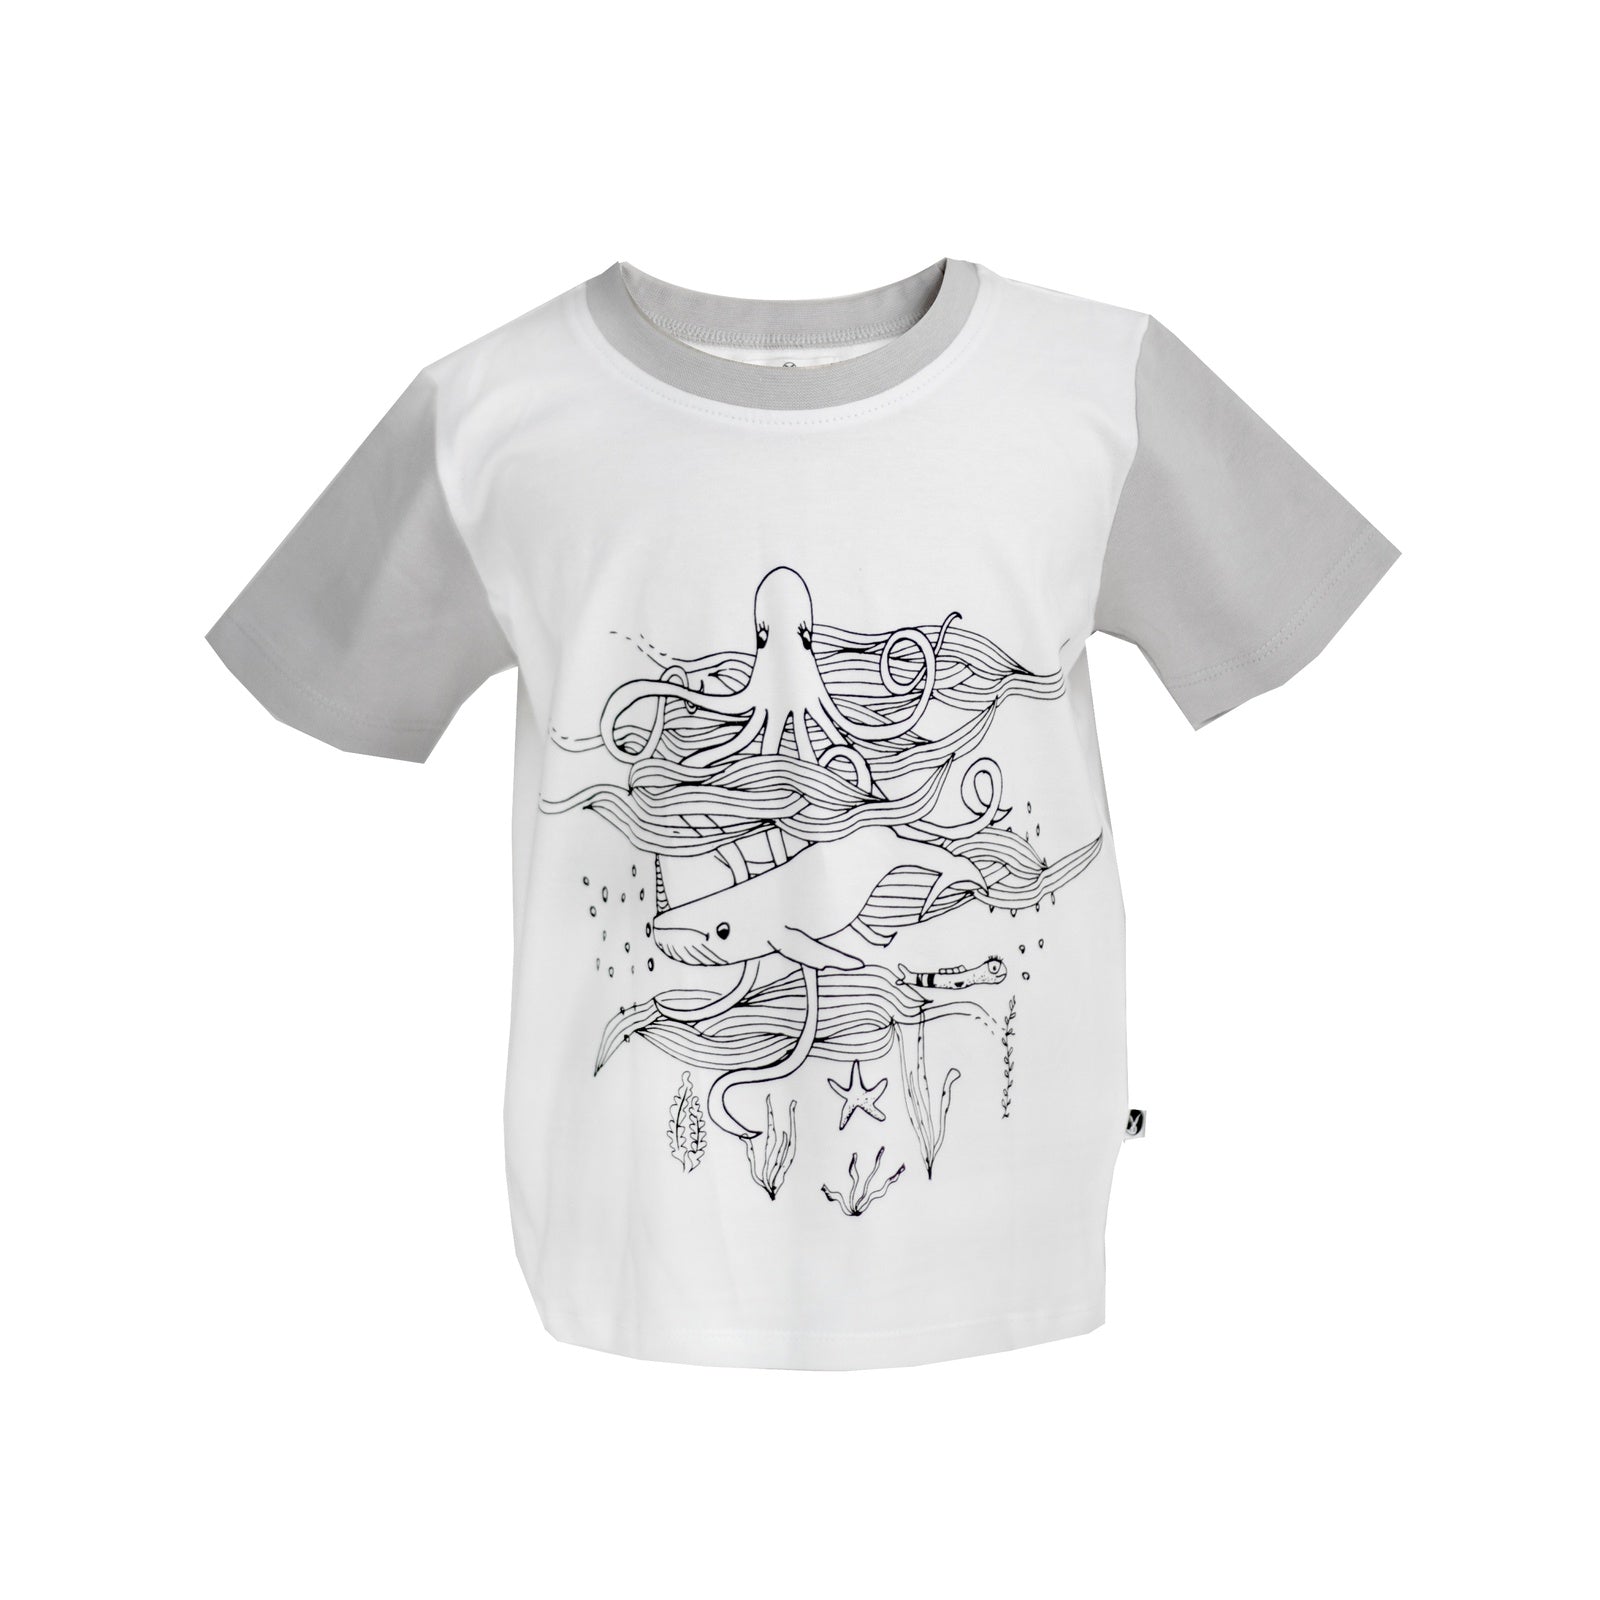 Burrow & Be - Classic Tee - Under the Sea Creatures